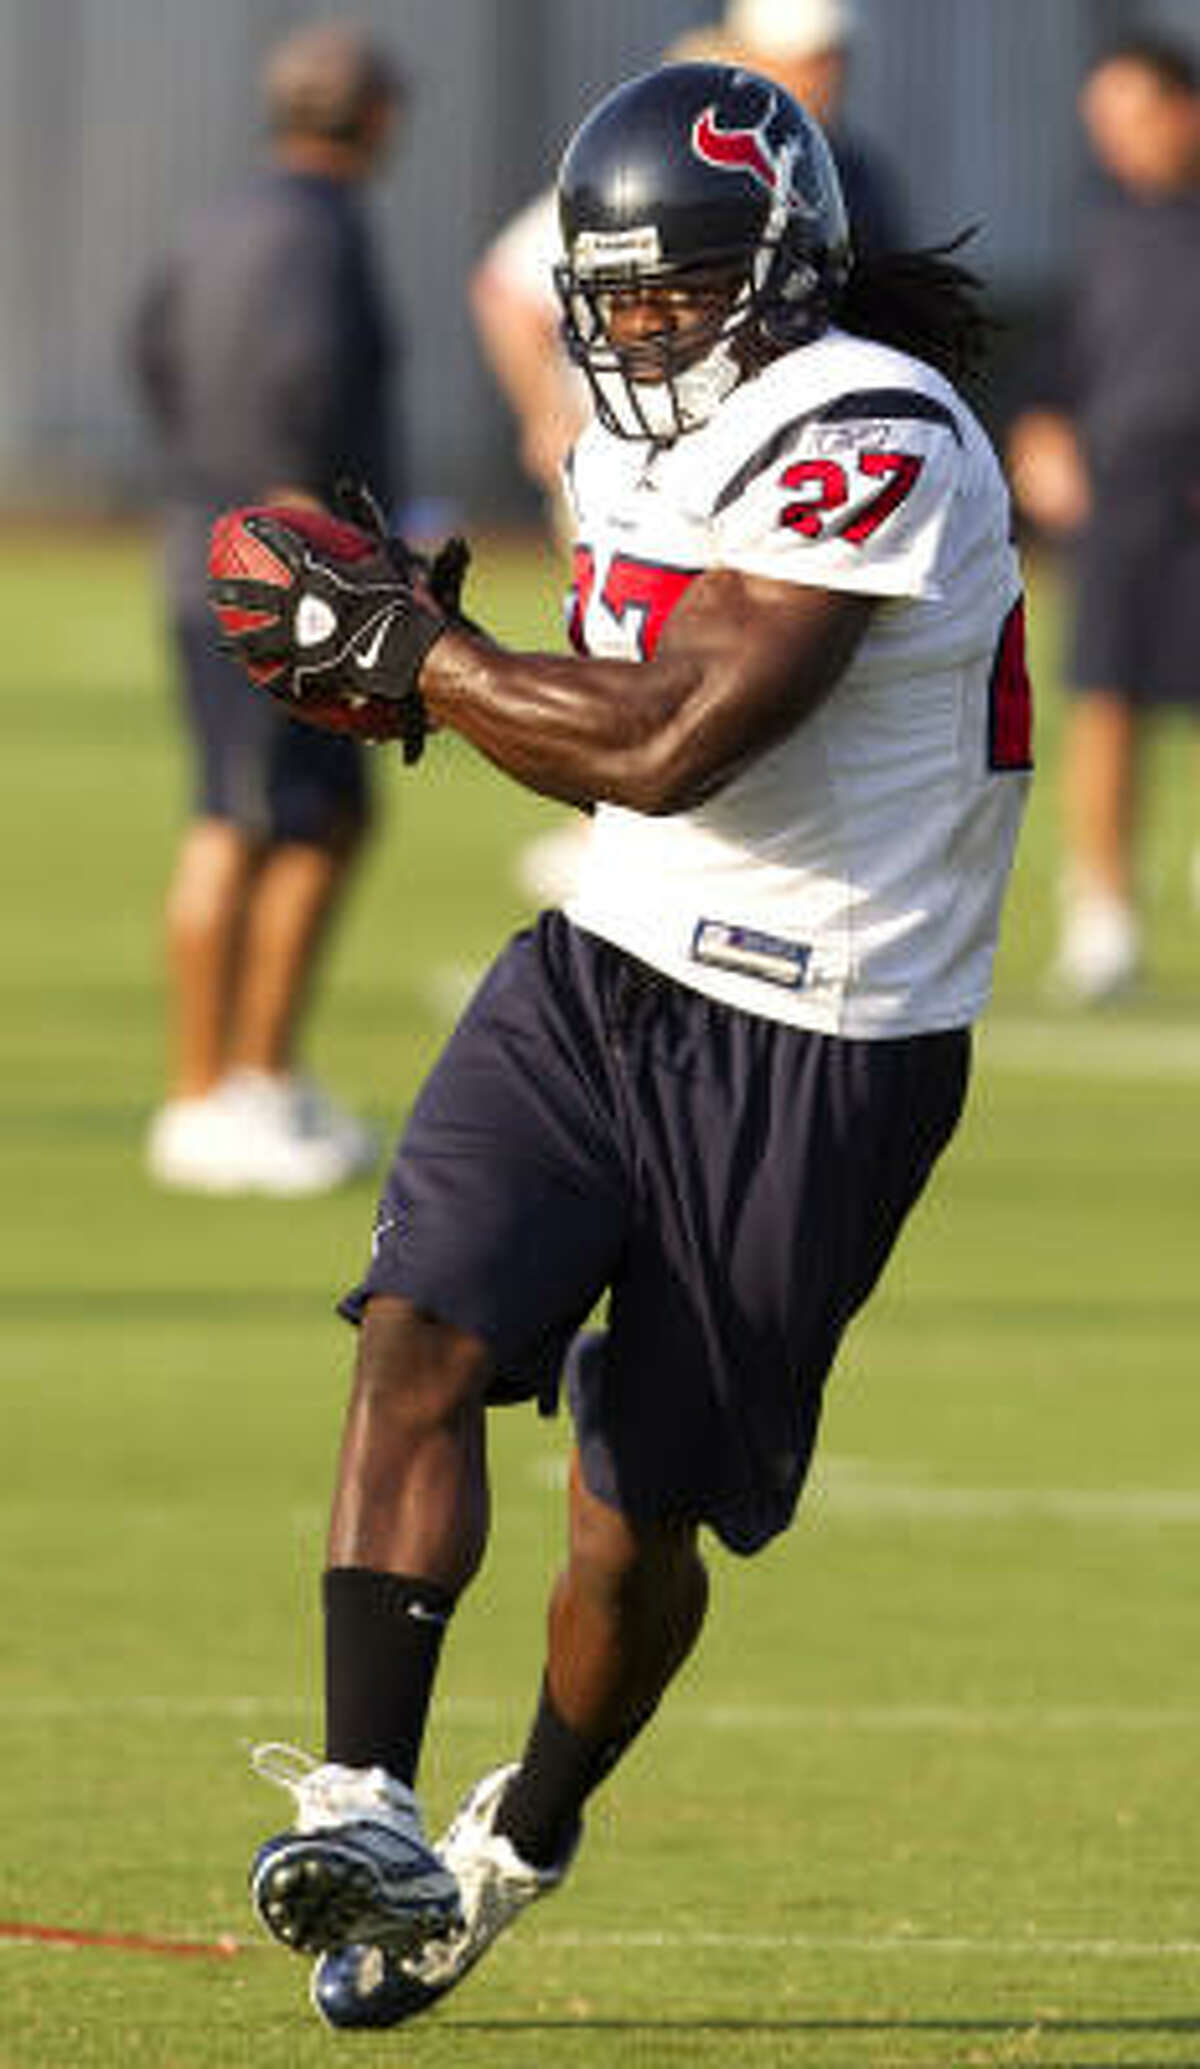 RB Chris Henry Henry was drafted by the Tennessee Titans in 2007 but released in September 2009. The Texans signed him to their practice squad the next month.